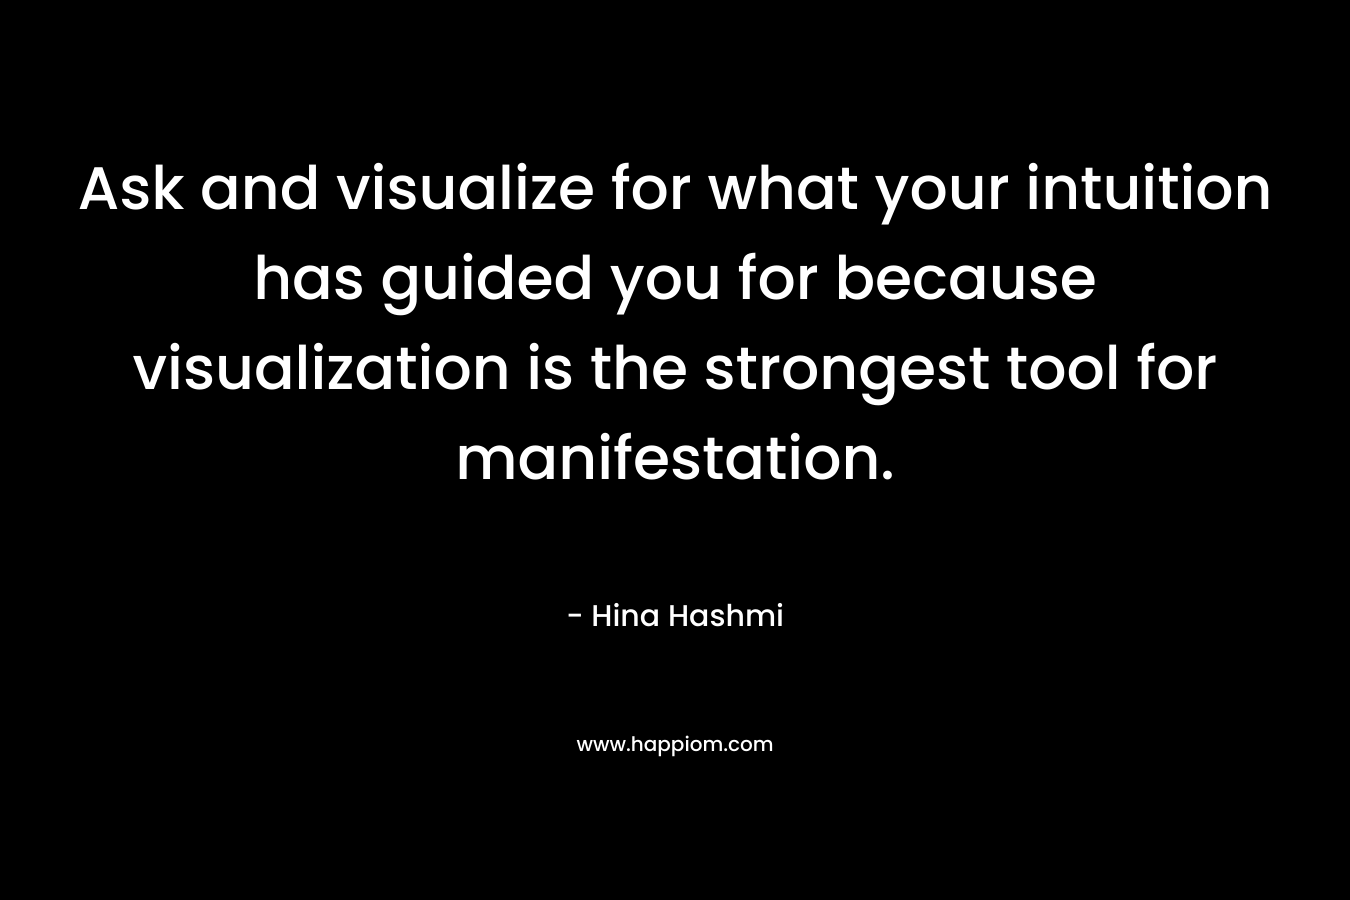 Ask and visualize for what your intuition has guided you for because visualization is the strongest tool for manifestation. – Hina Hashmi